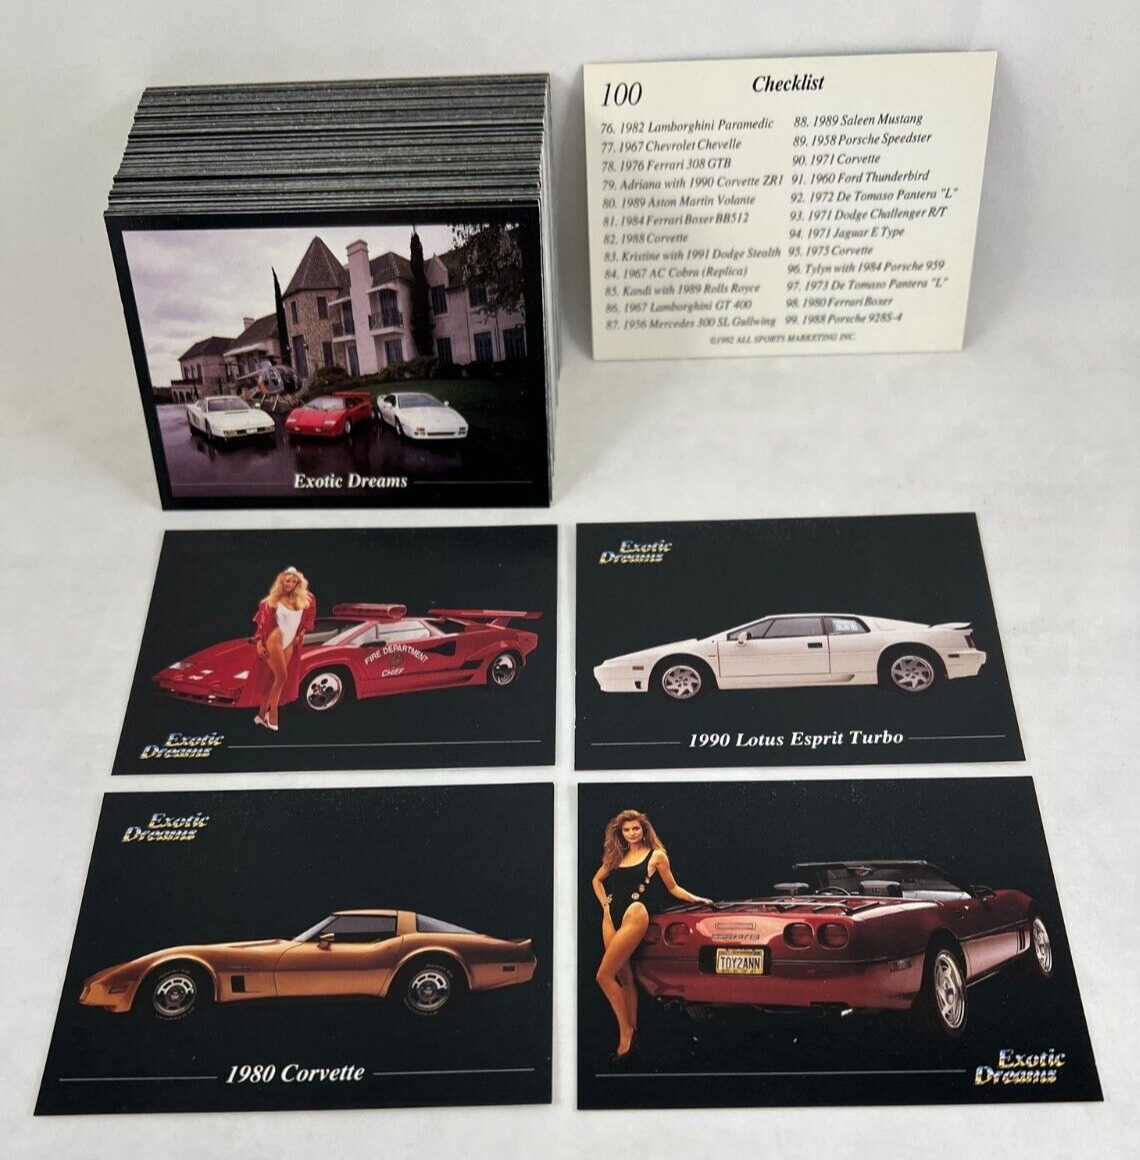 EXOTIC DREAMS (All Sports 1992) Complete Card Set IMAGES OF LUXURY DREAM CARS